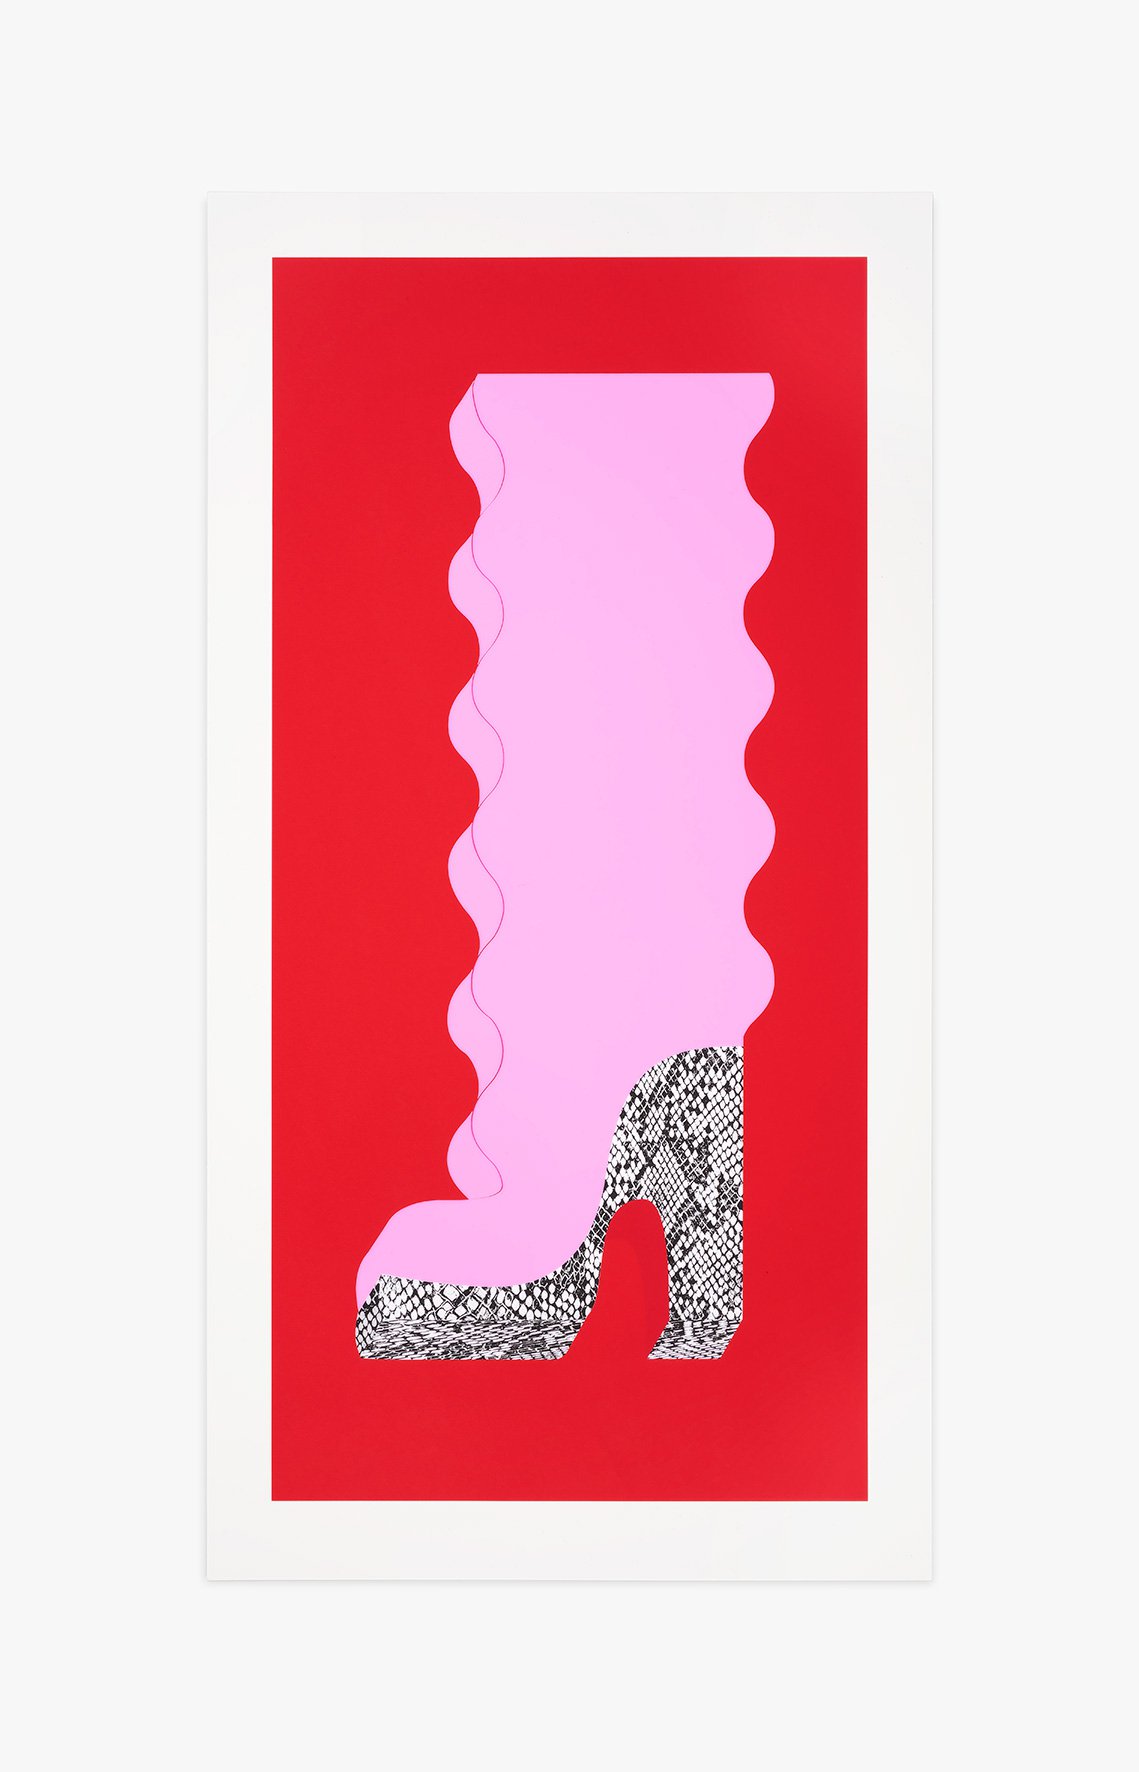 Anthea Hamilton, Pink Whips Wavy Boot, 2017